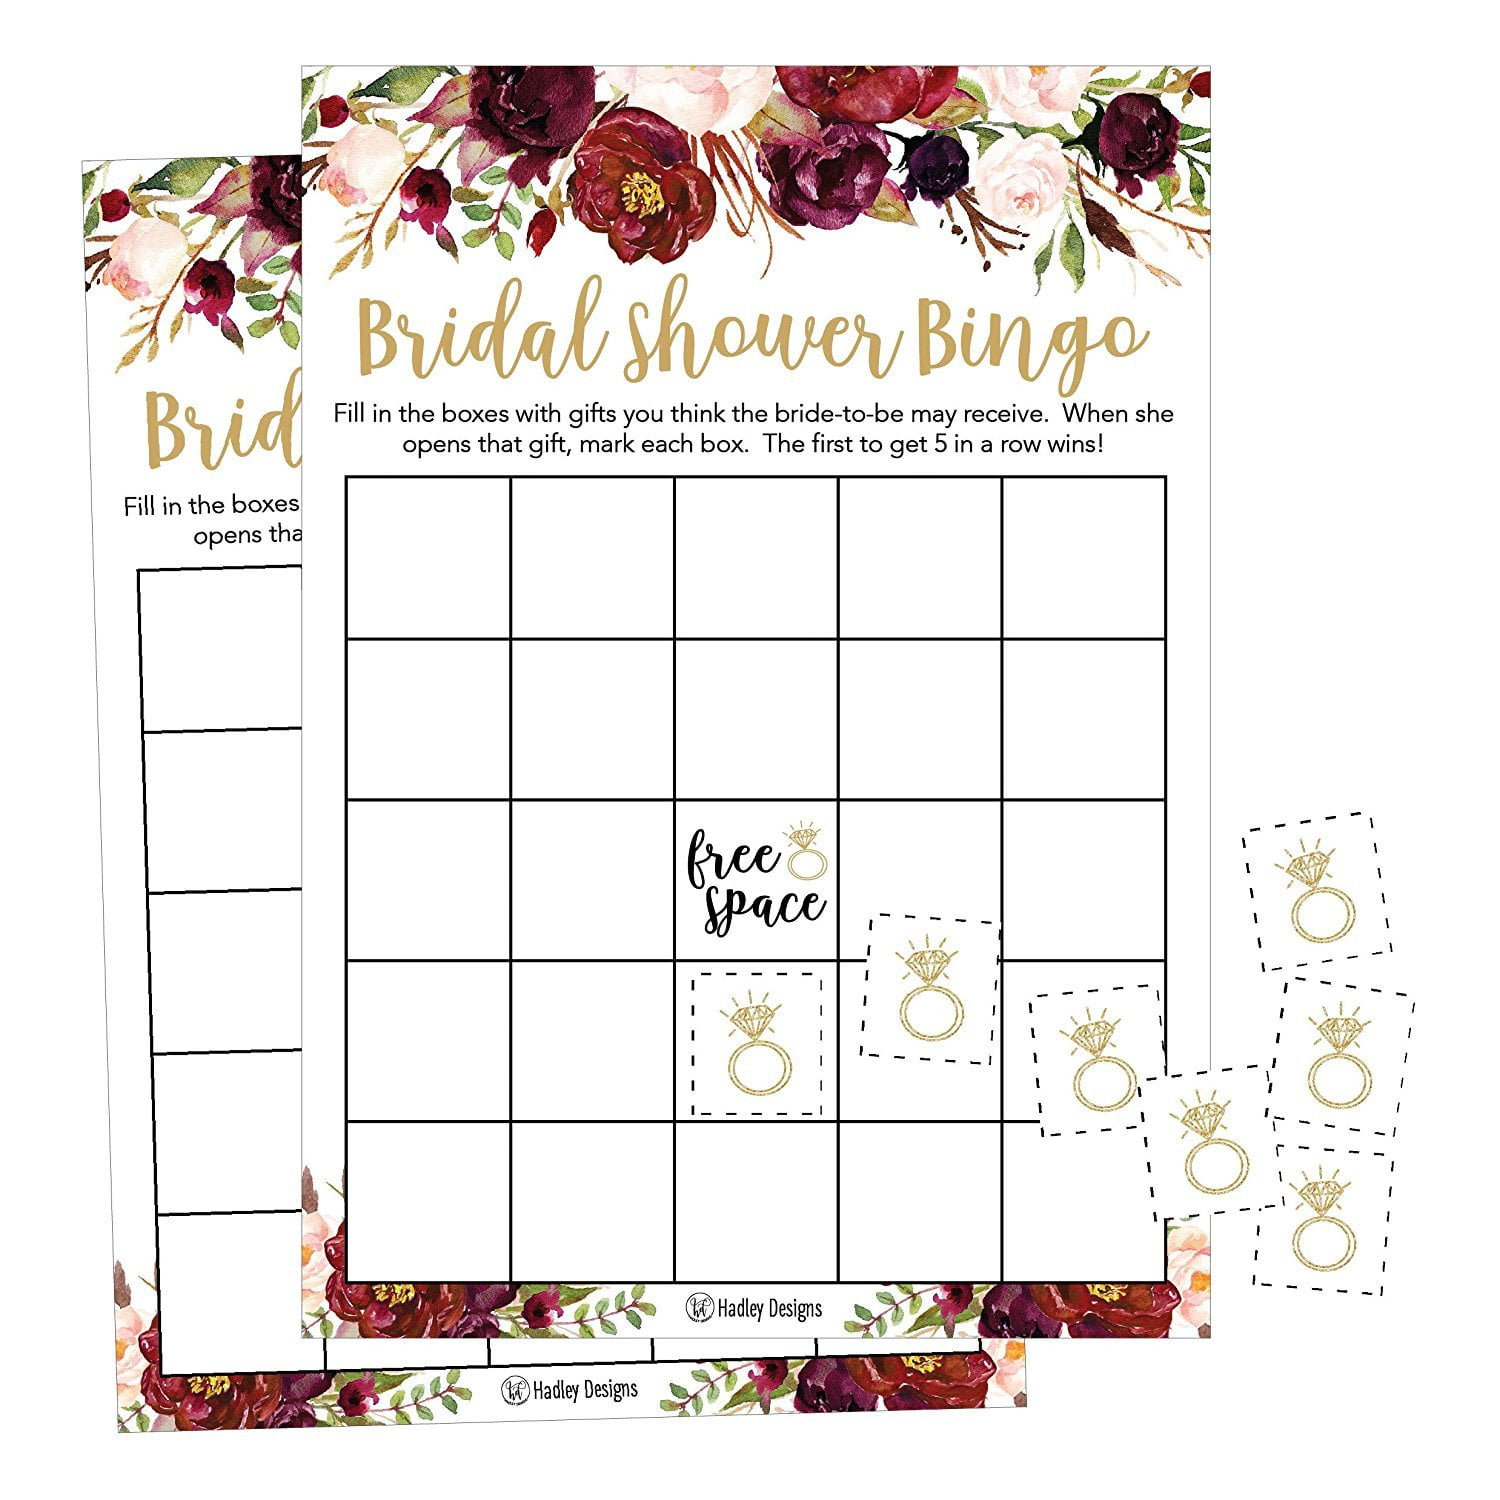 23 Pink Flower Bingo Game Cards For Bridal Wedding Shower and Bachelorette  Party, Bulk Blank Squares To Fill In Gift Ideas, Funny Supplies For Bride Intended For Blank Bridal Shower Bingo Template